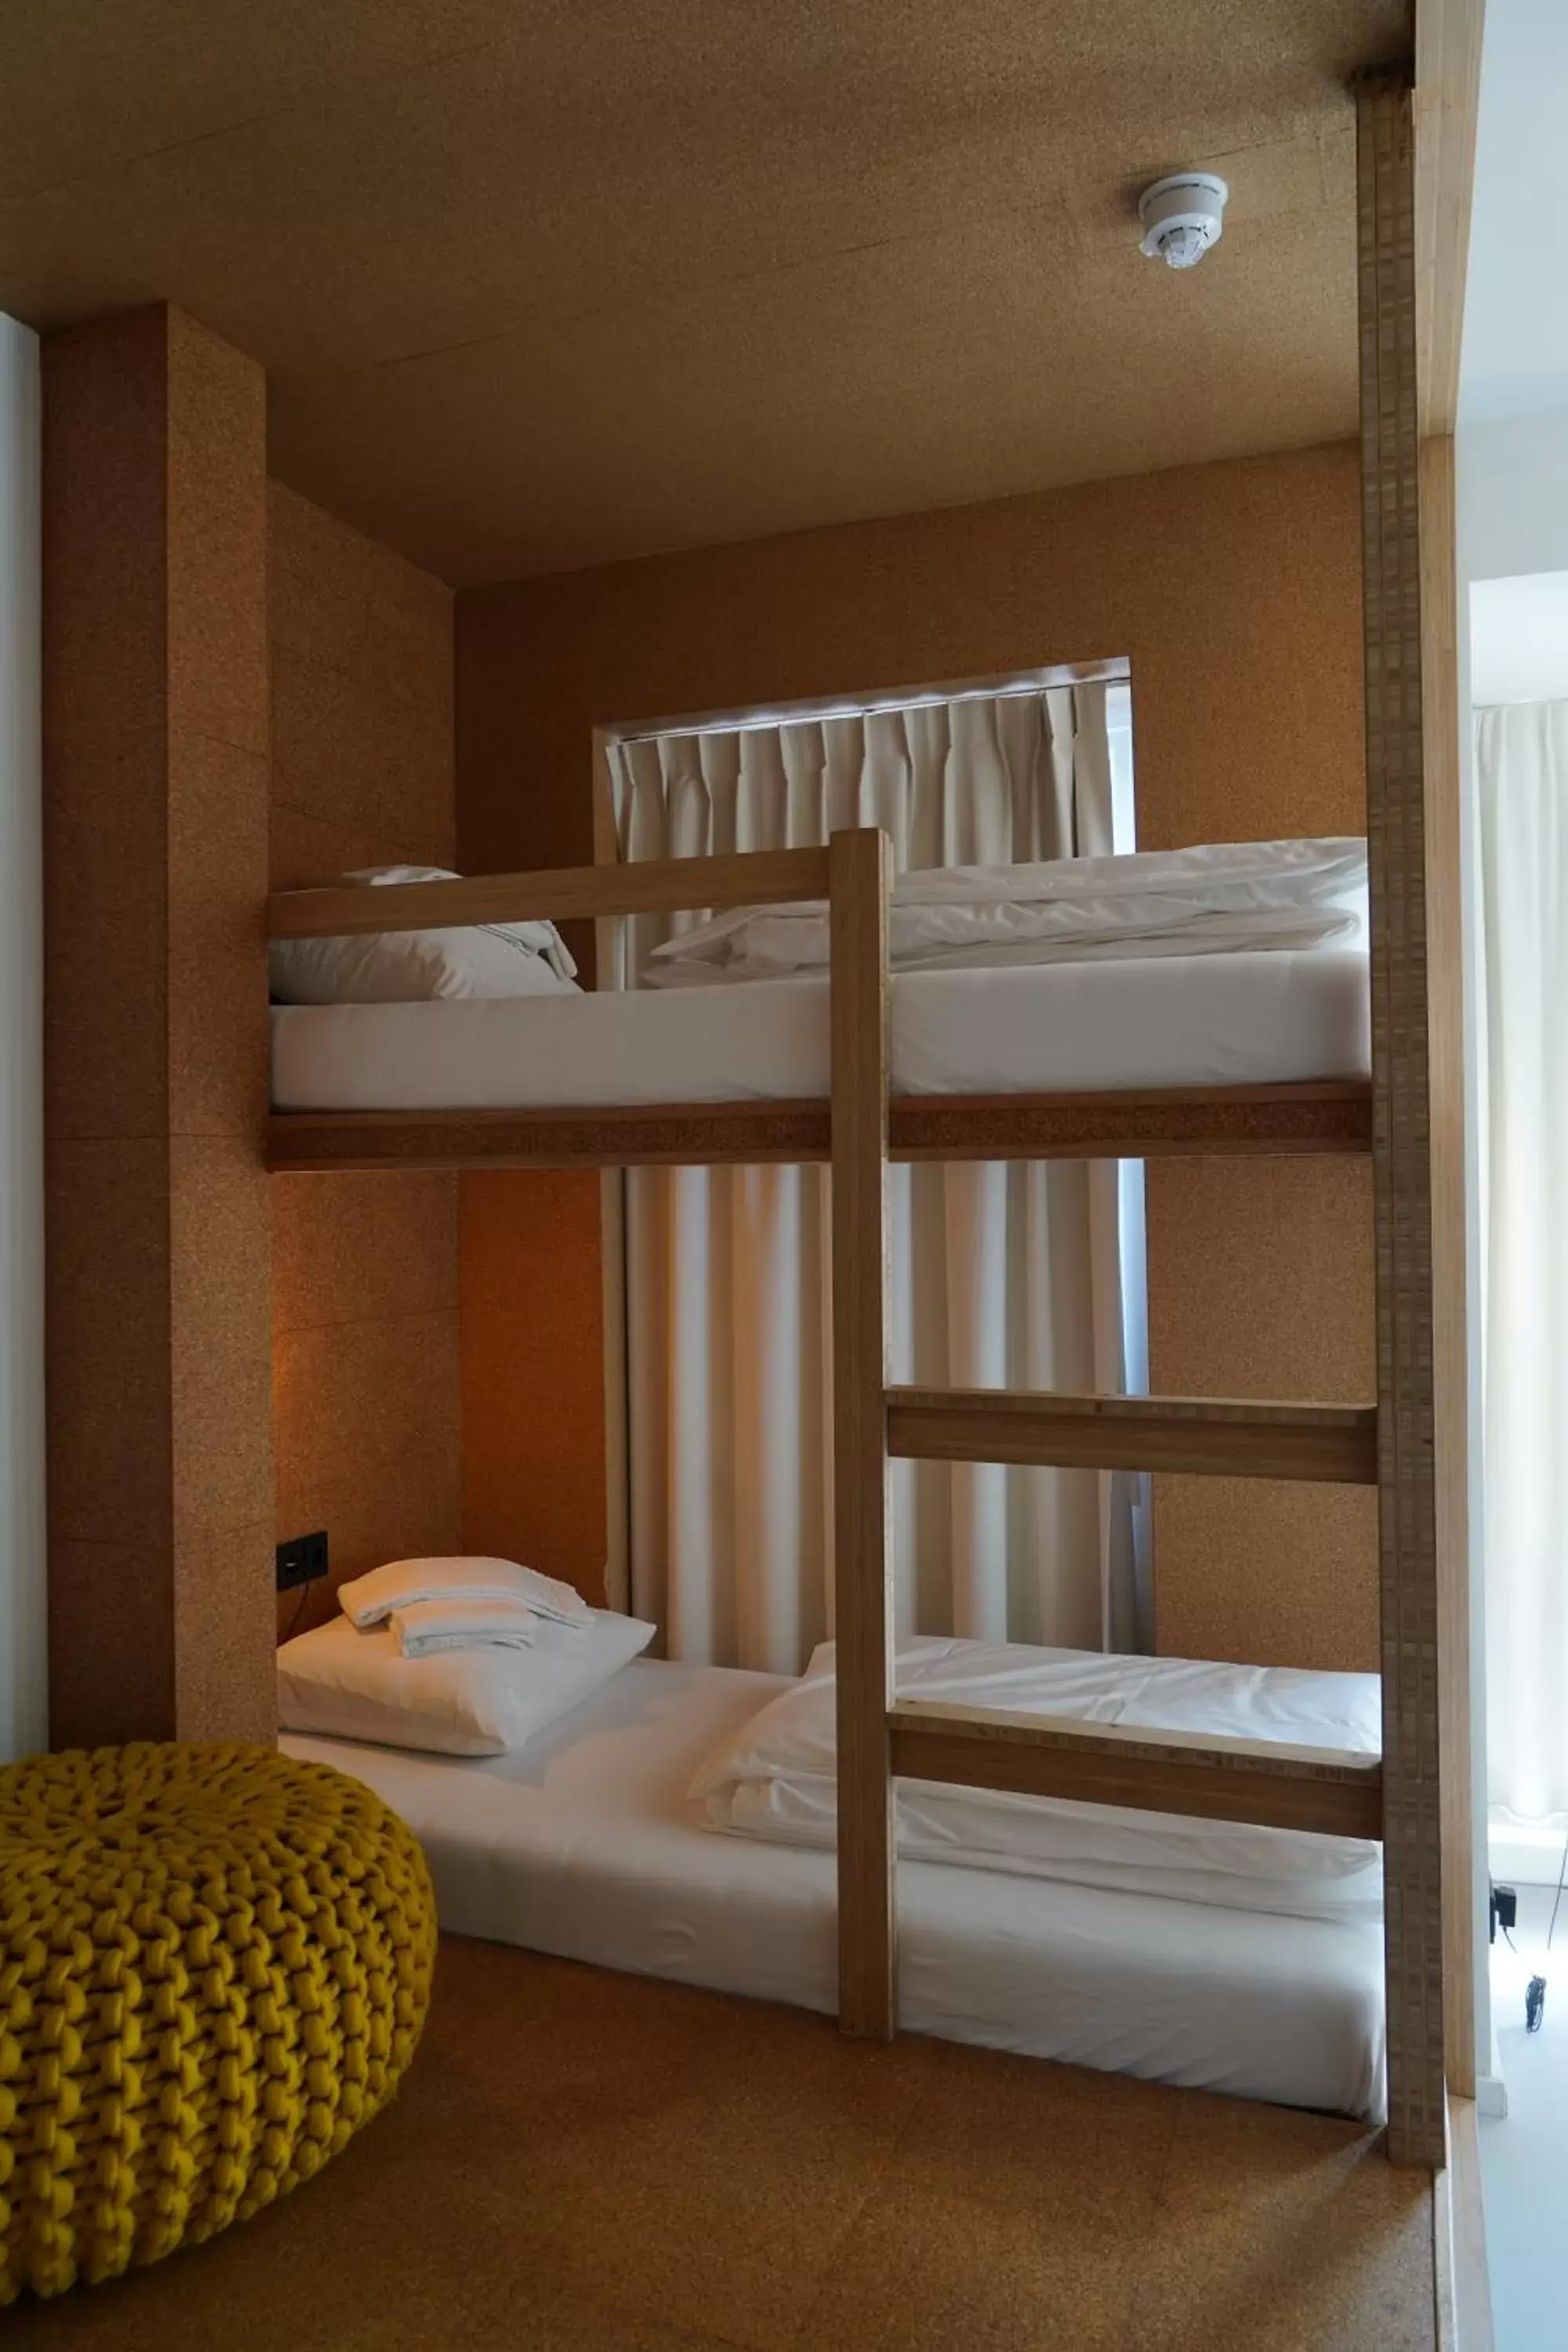 Bed, Bunk Bed in the bellhop